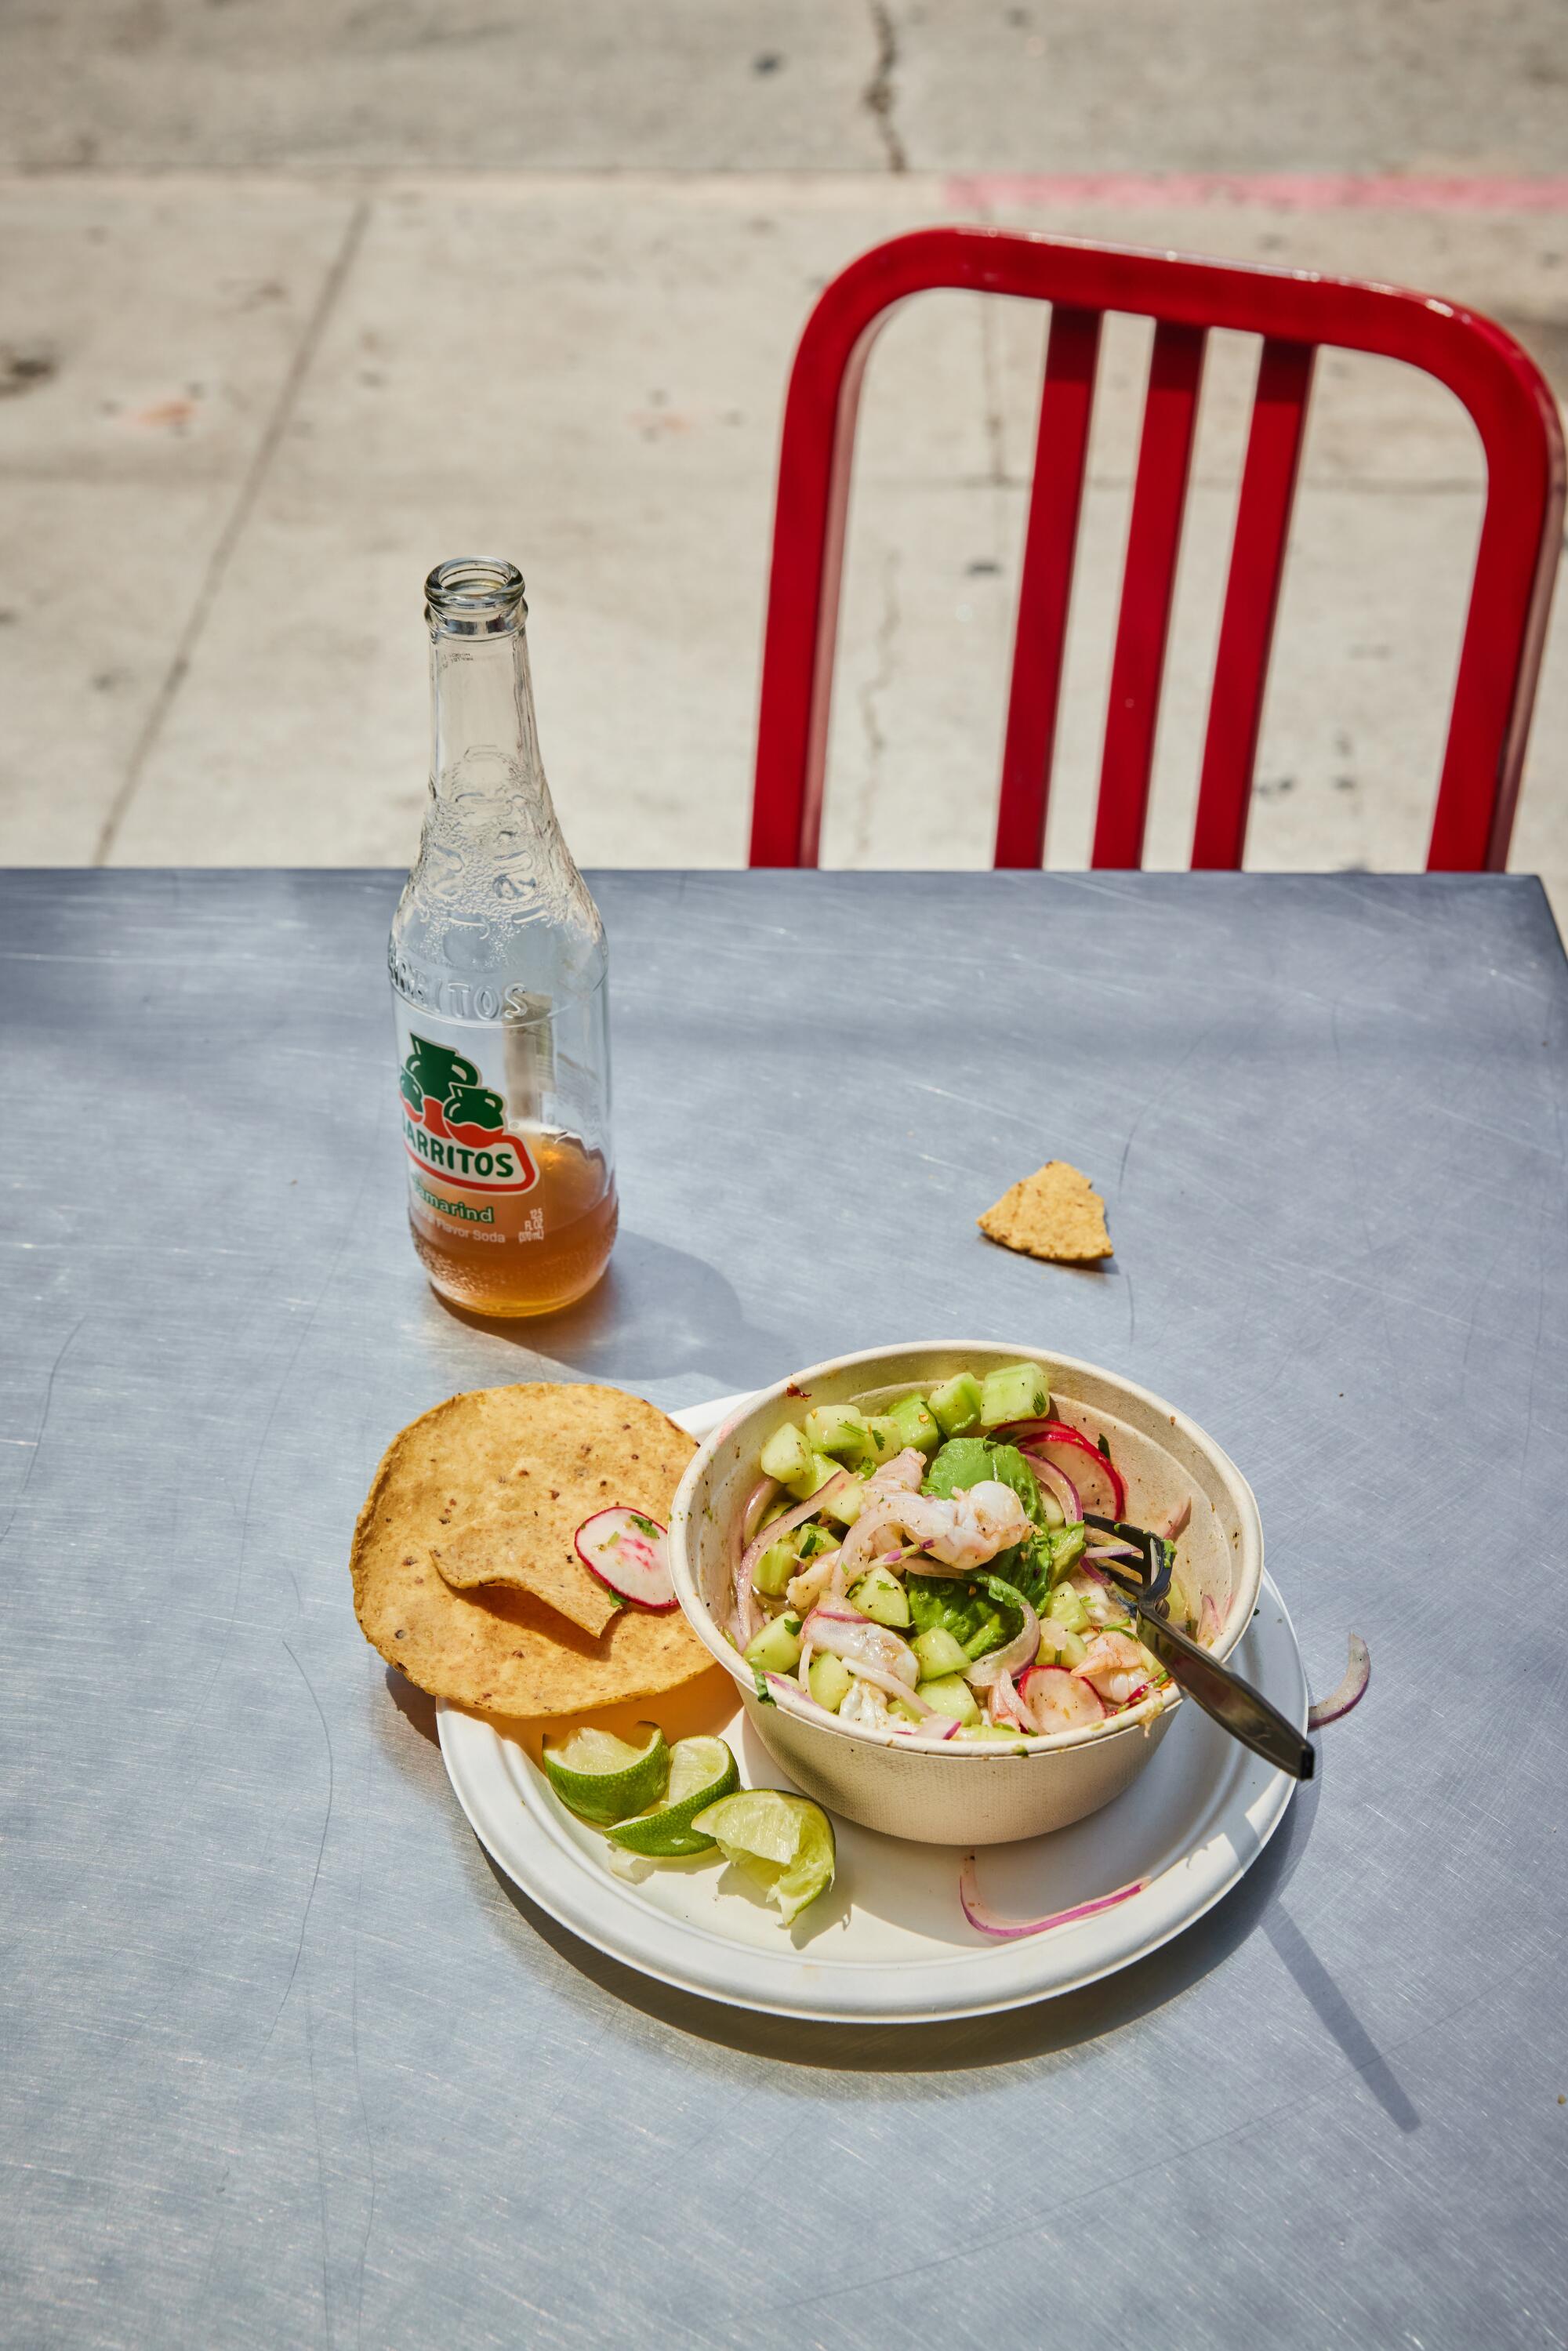 A plate of food sits next to a Jarritos bottle on a silver table outdoors. 